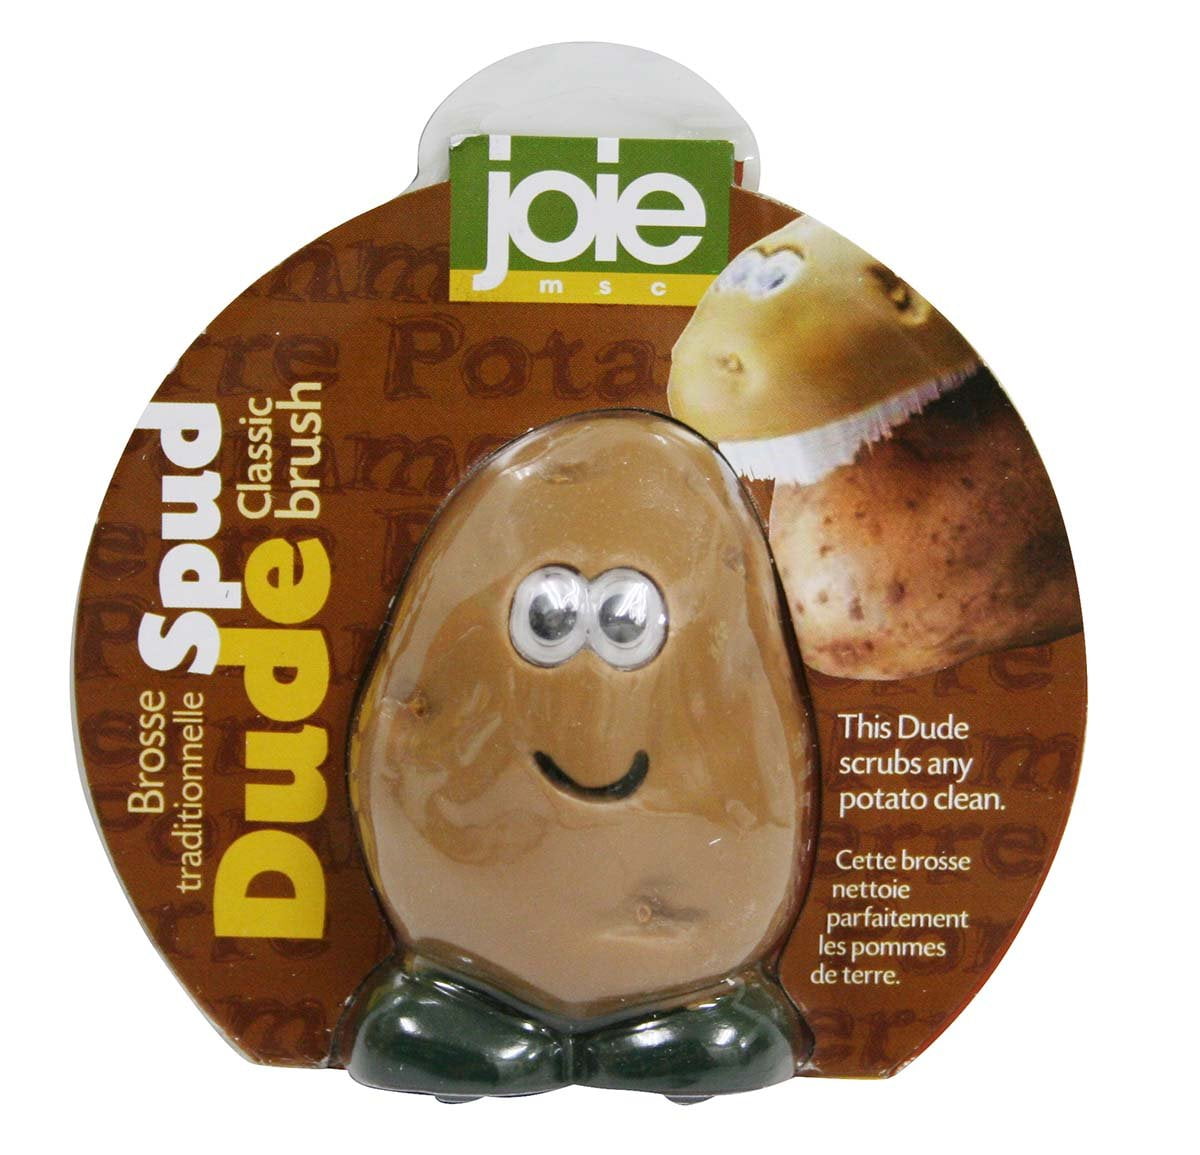 Joie Spud Dude Potato Vegetable Scrub Cleaner Brush 3 x 2 3 x 2-Inches 